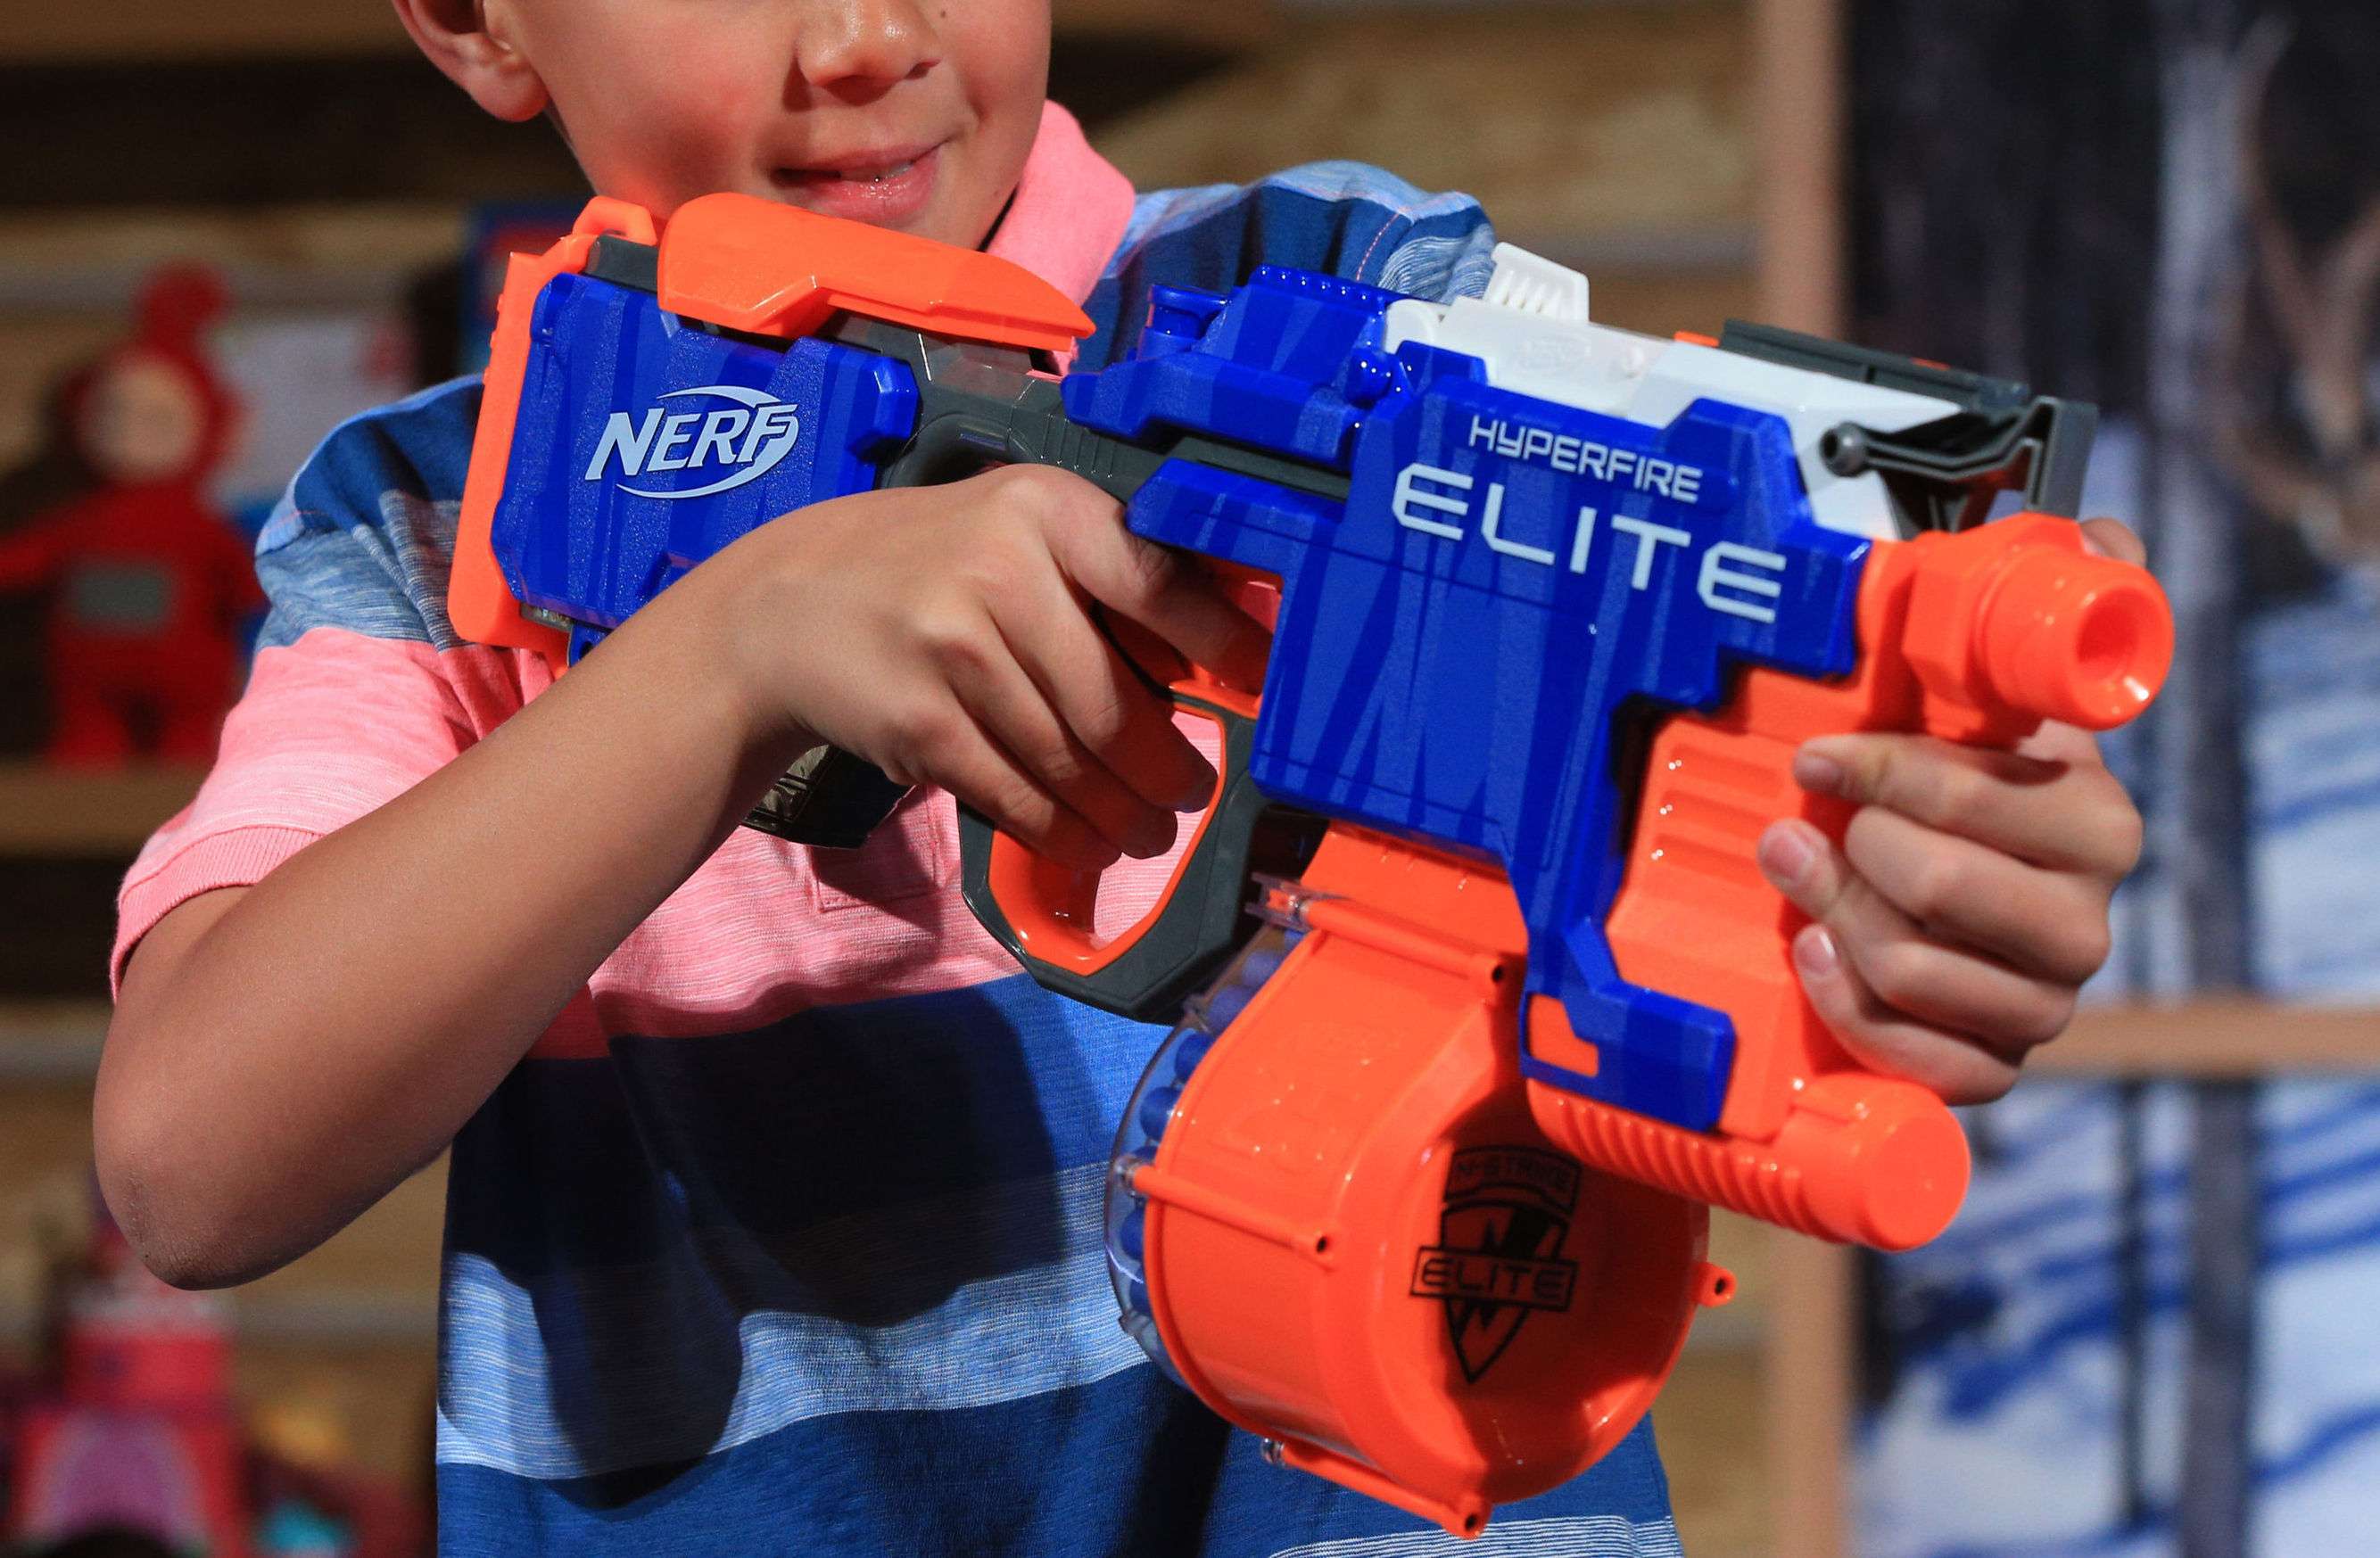 Don't Narc on Kids' Nerf Guns Unless You Want Potentially Tragic  Confrontations